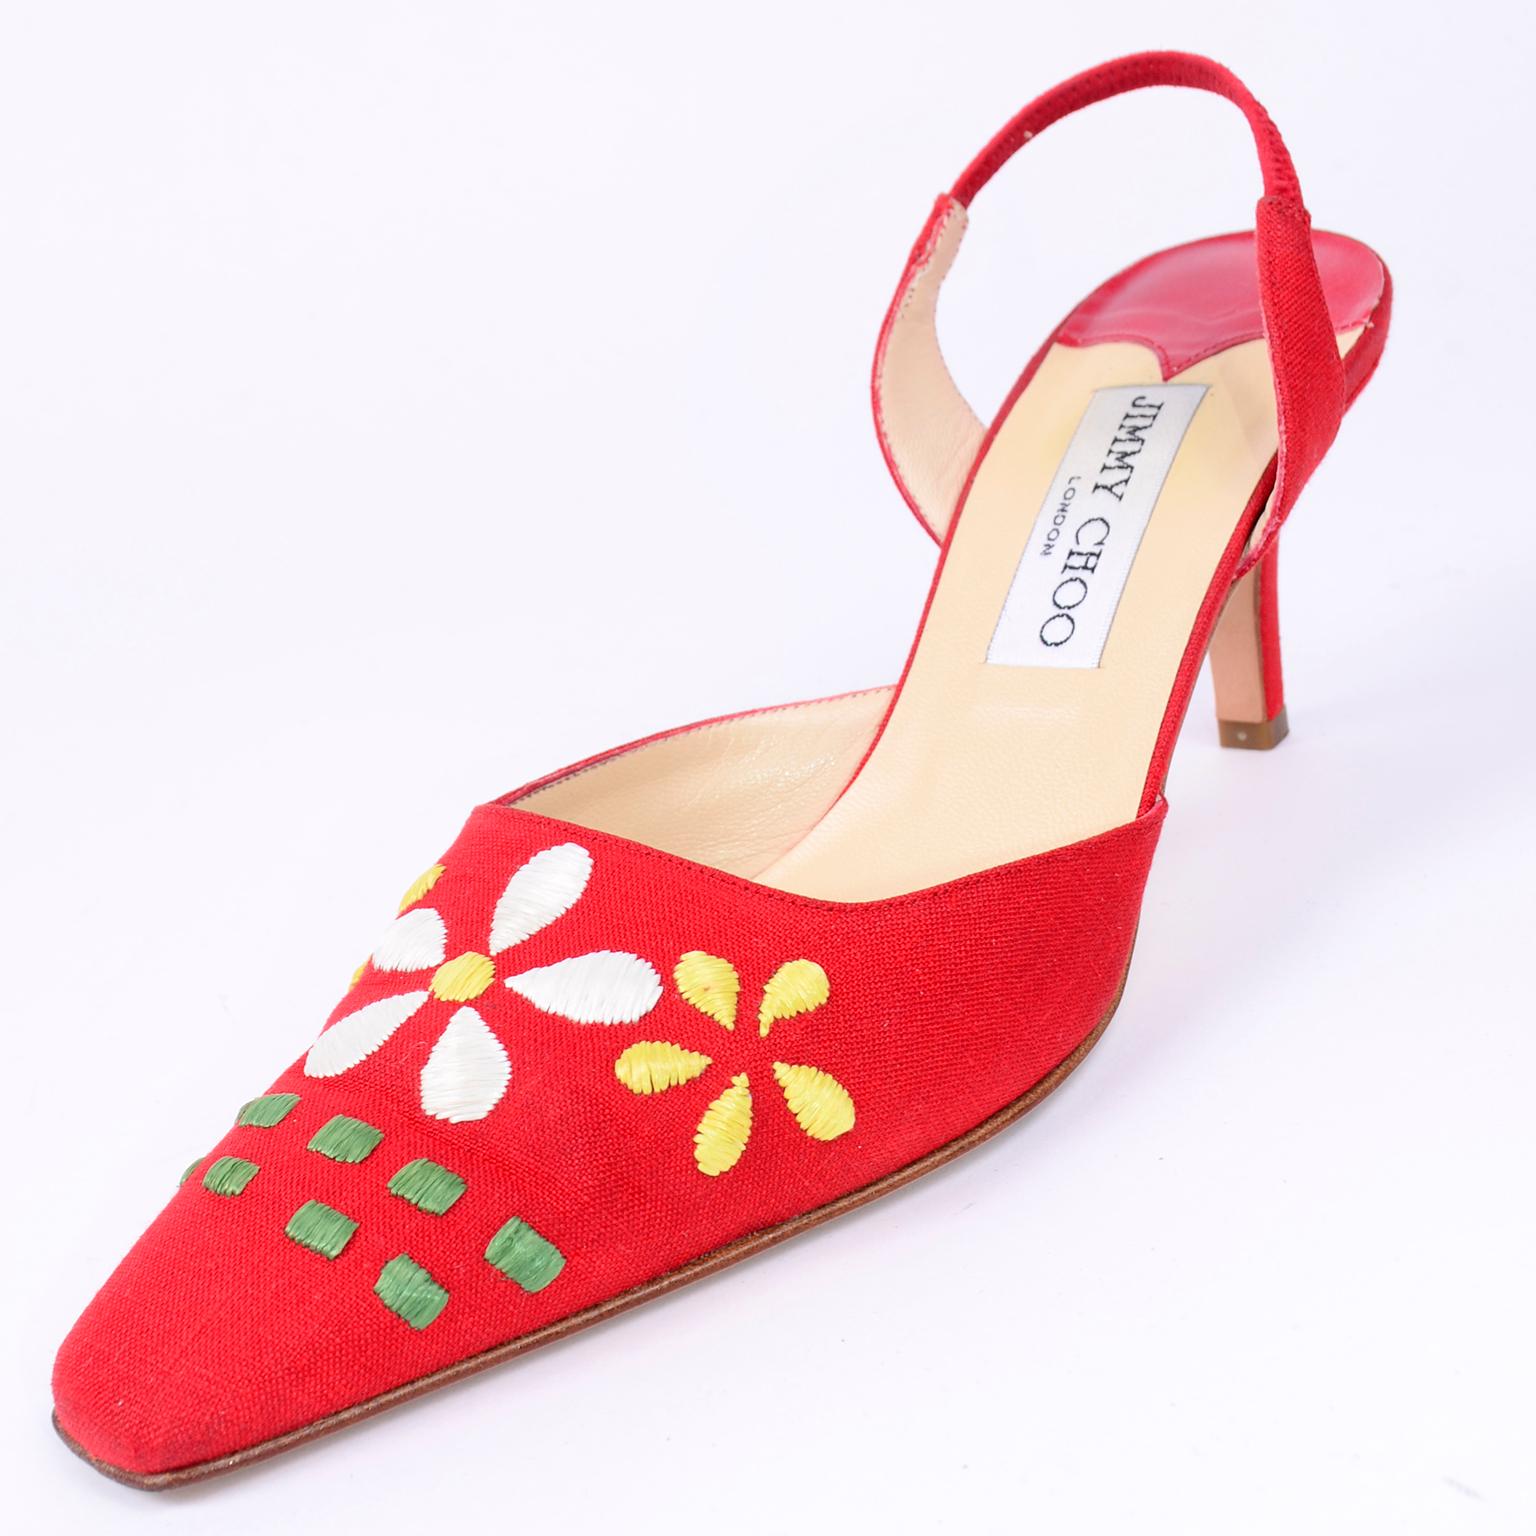 Red Linen Jimmy Choo Slingback Heel Shoes With Daisy Flowers 5